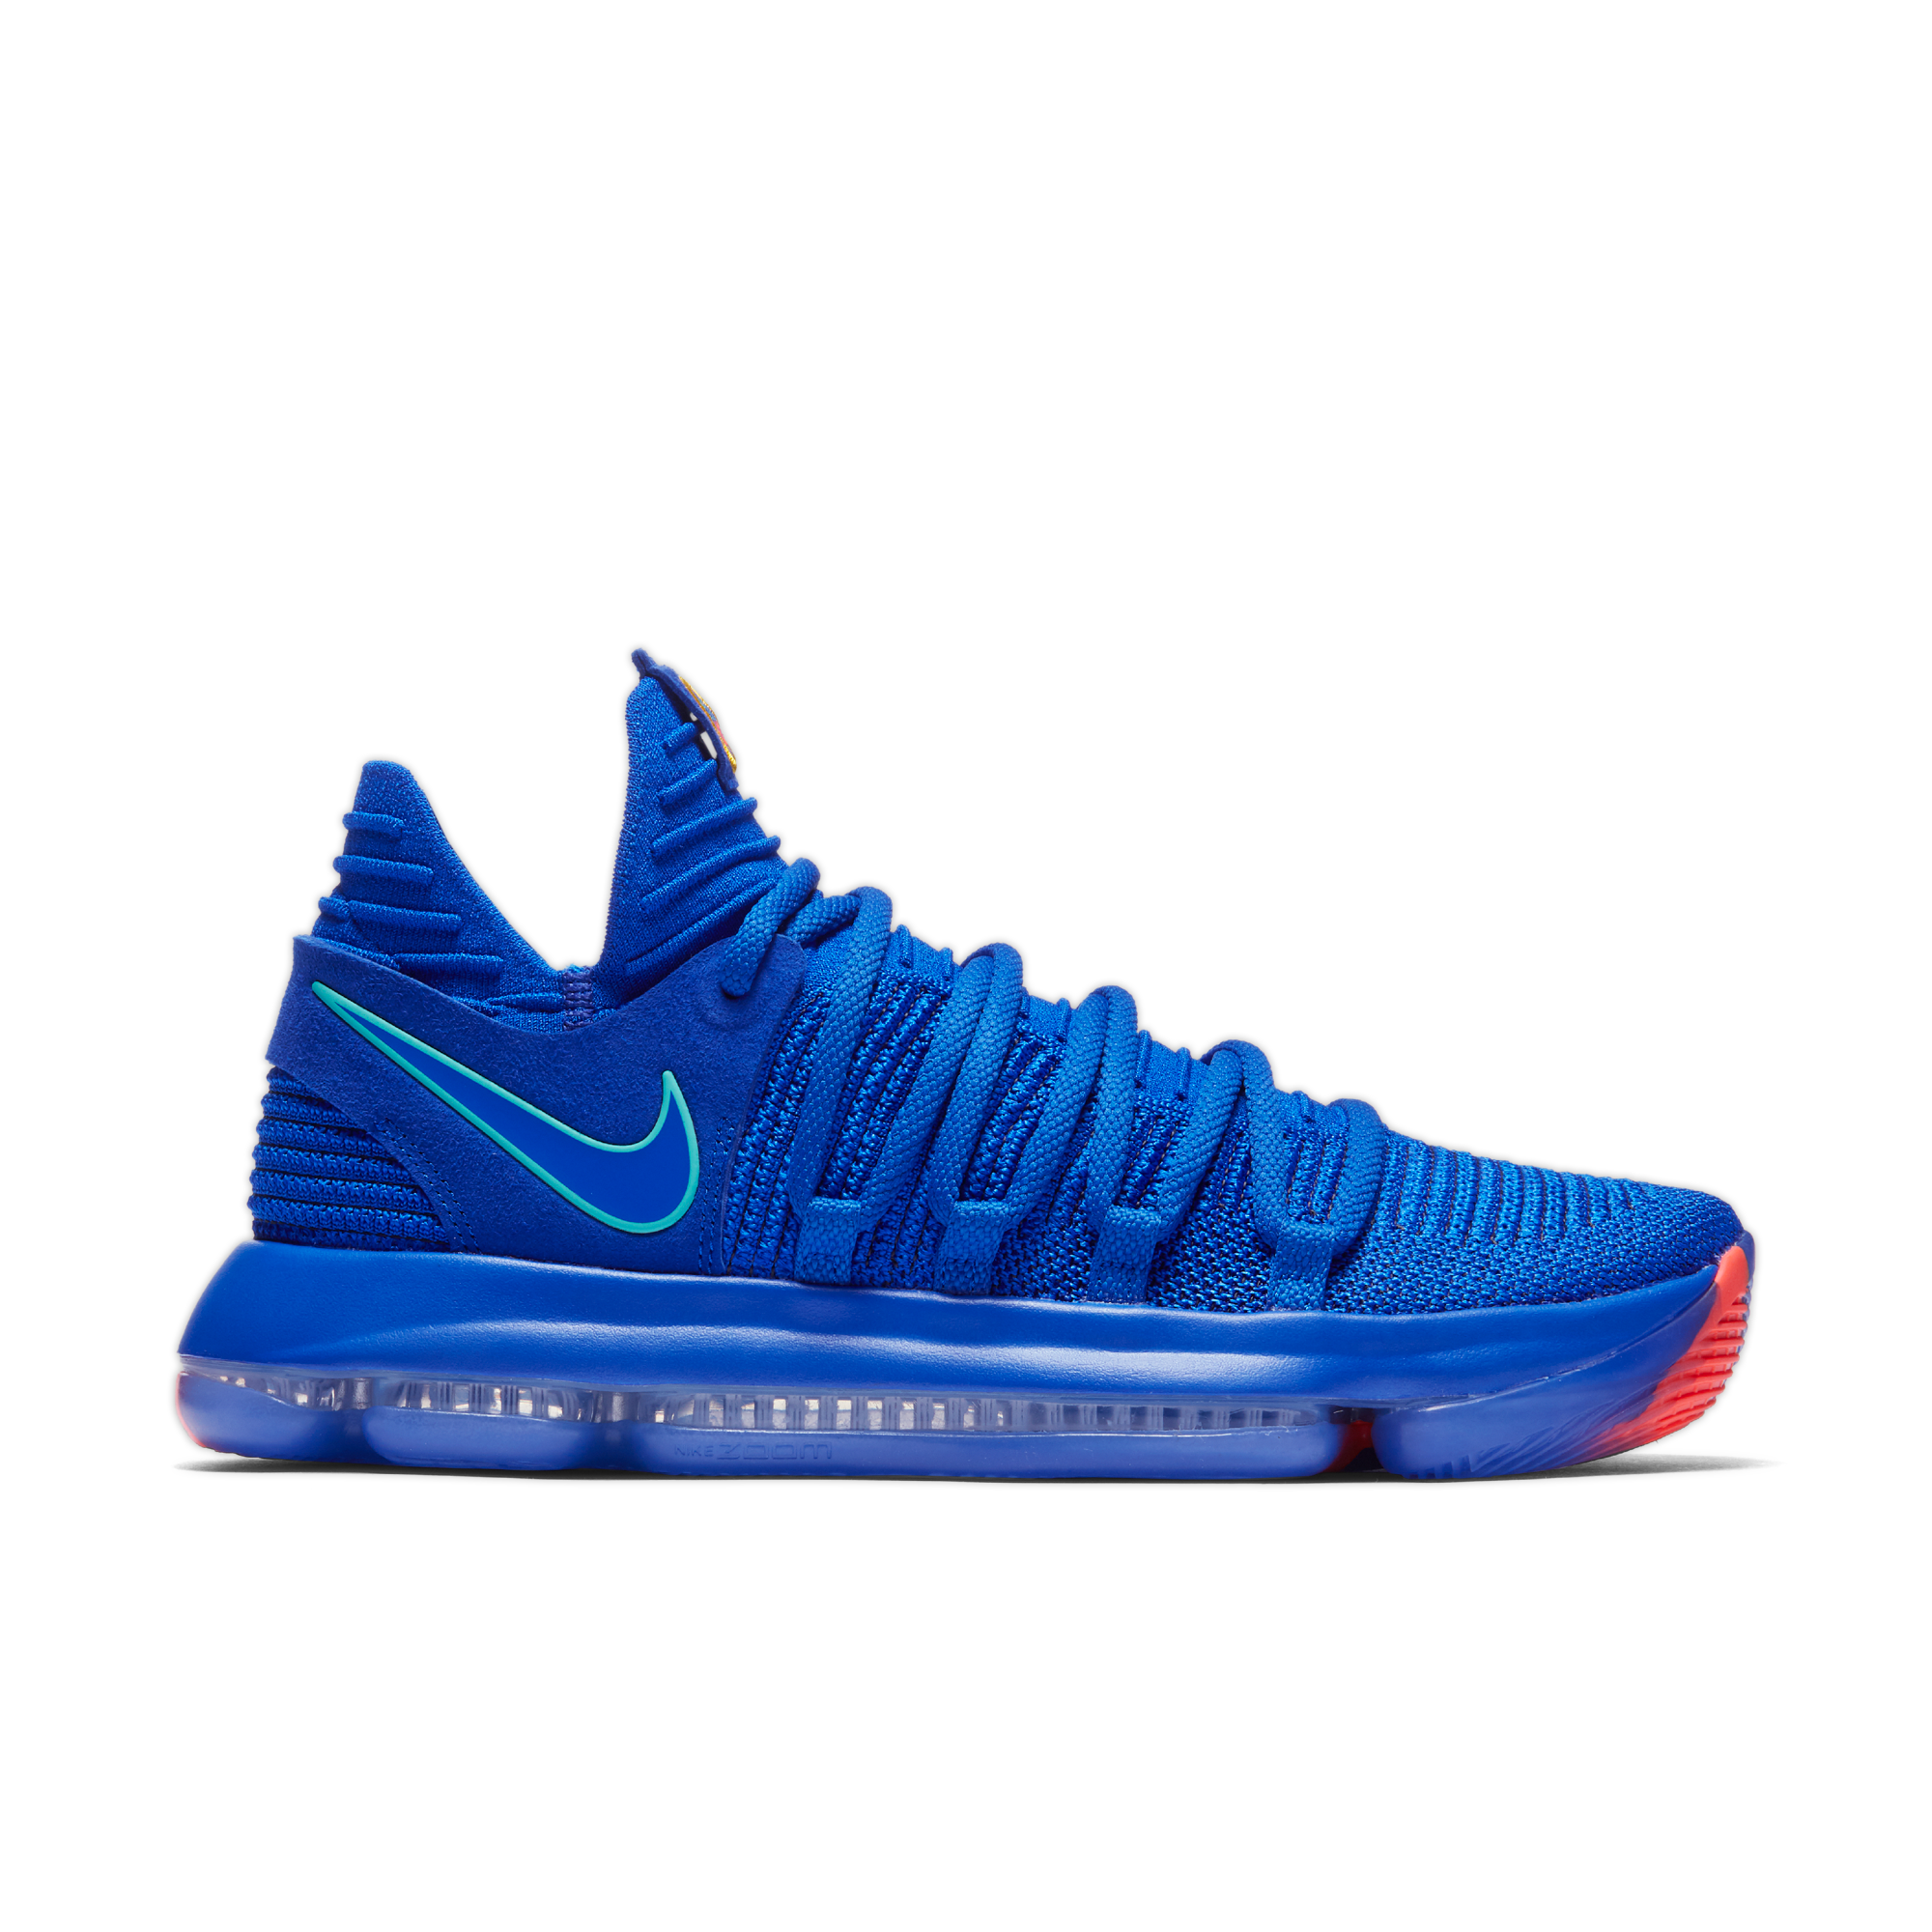 kd volleyball shoes